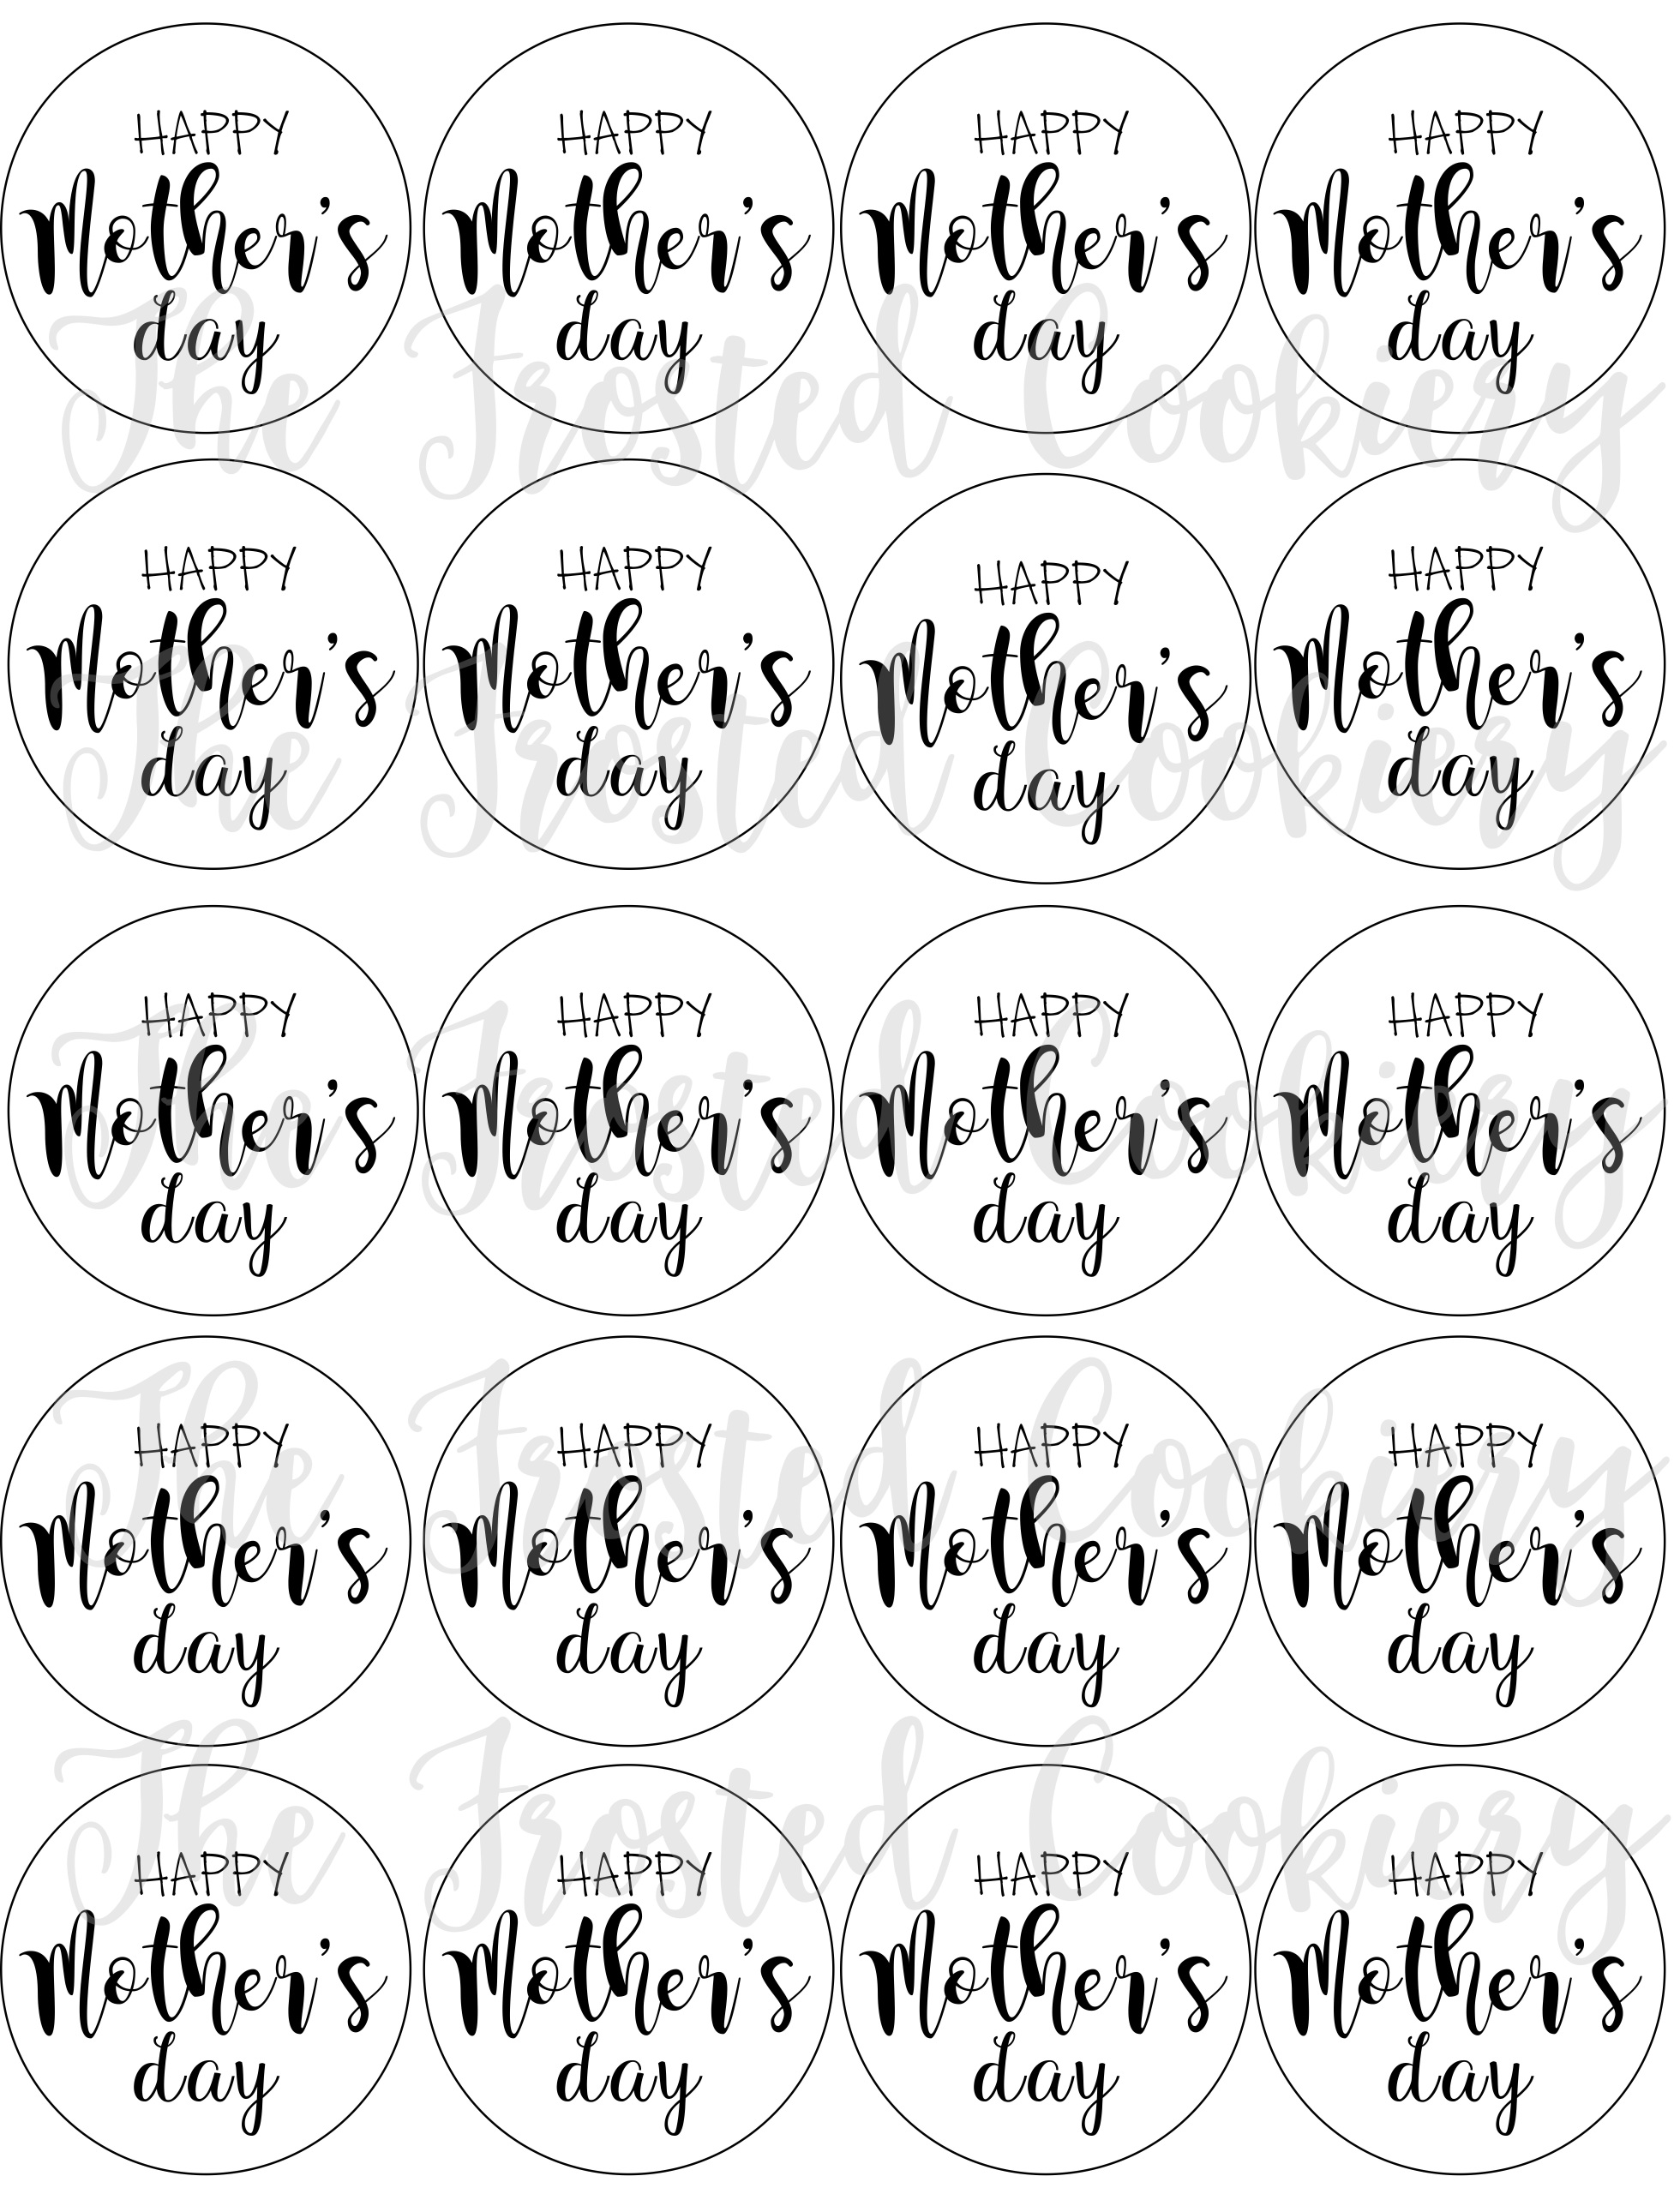 Free Printable Happy Mothers Day Tags To Print